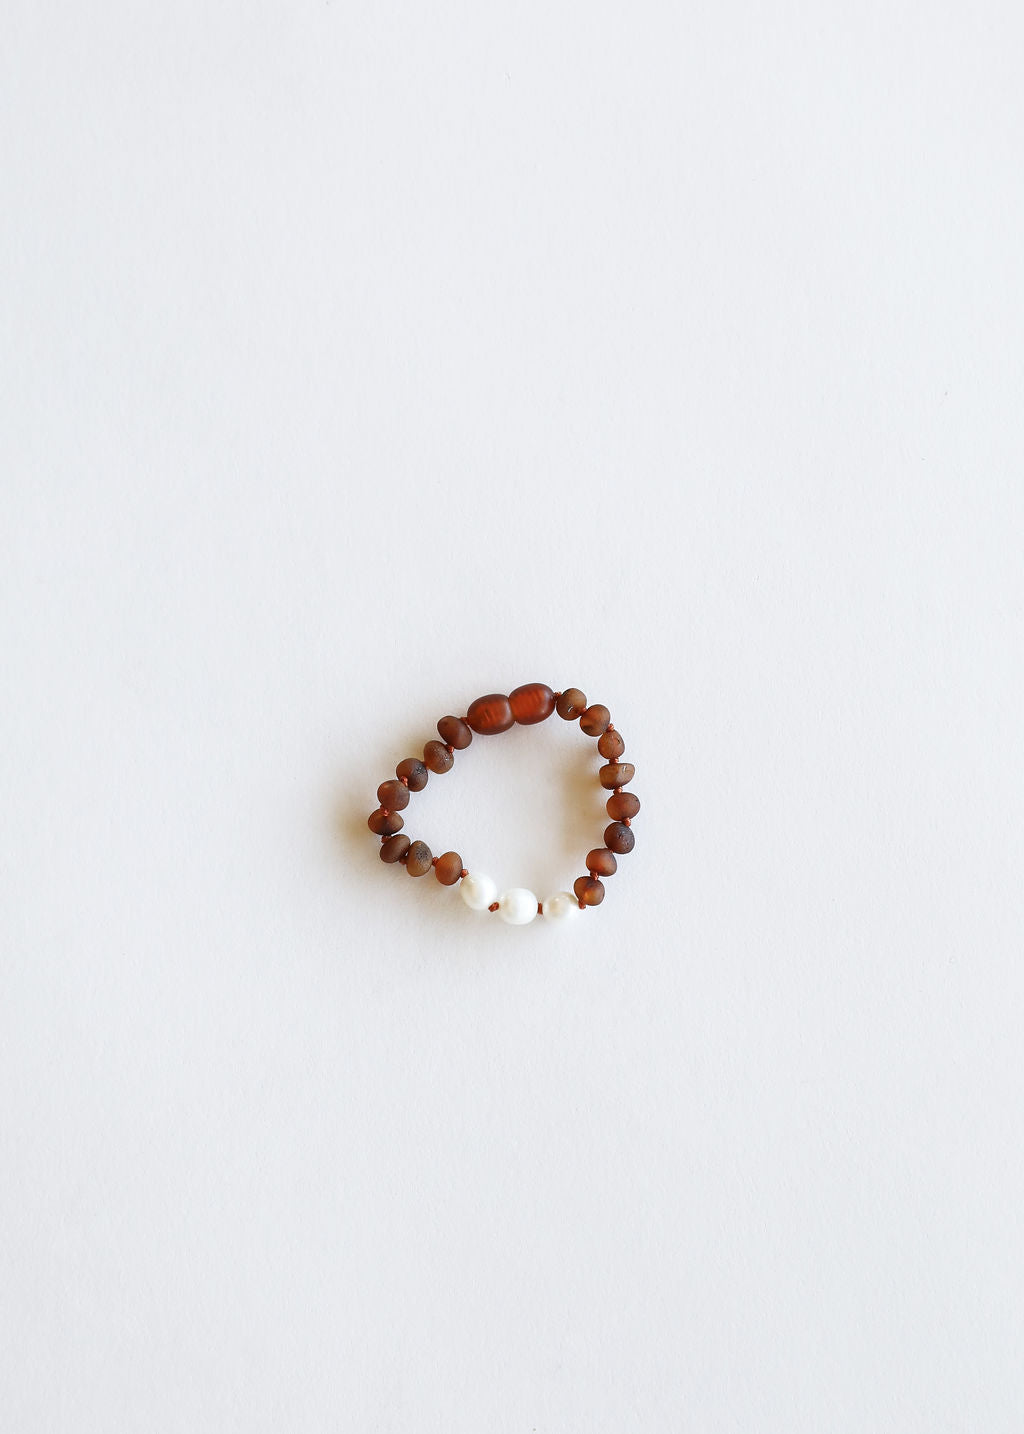 Raw Cognac Baltic Amber + Pearls || Anklet or Bracelet